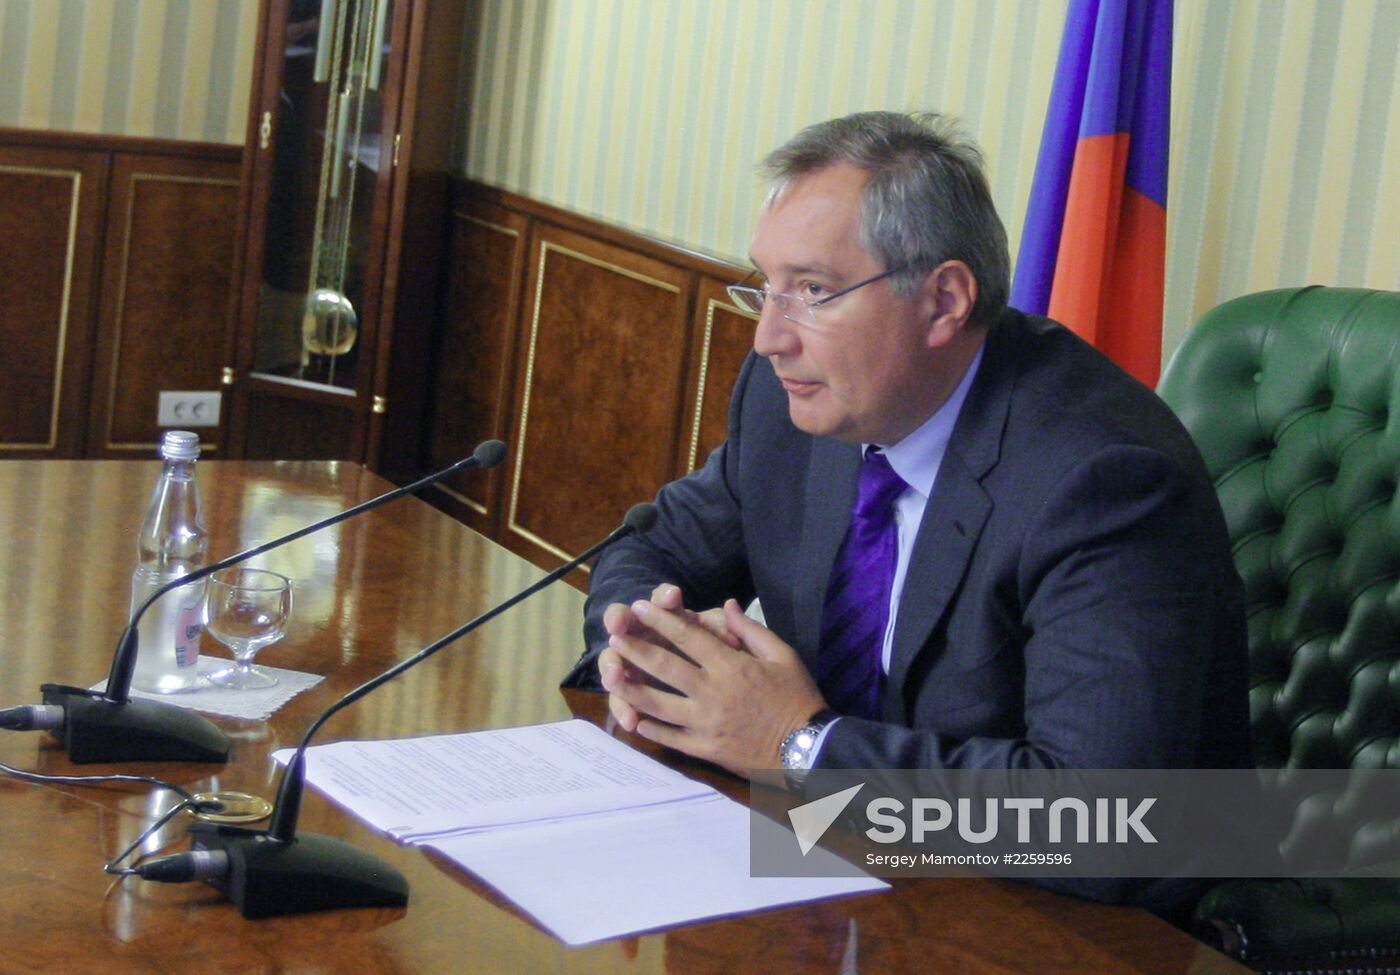 Dmitry Rogozin chairs meeting of Military Industrial Commission